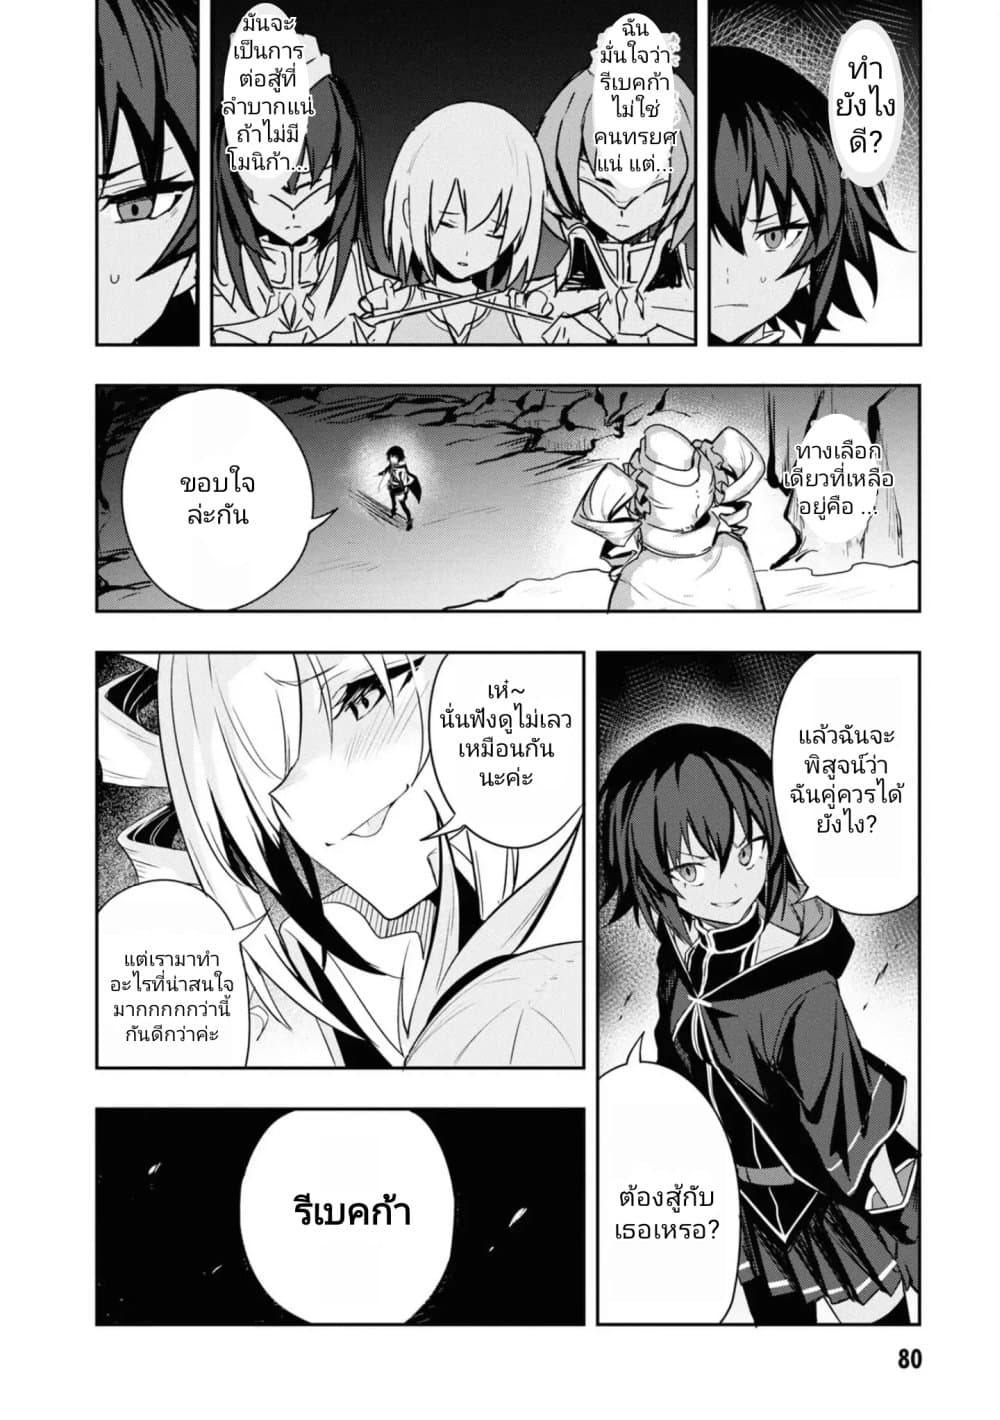 Witch Guild Fantasia 8 14